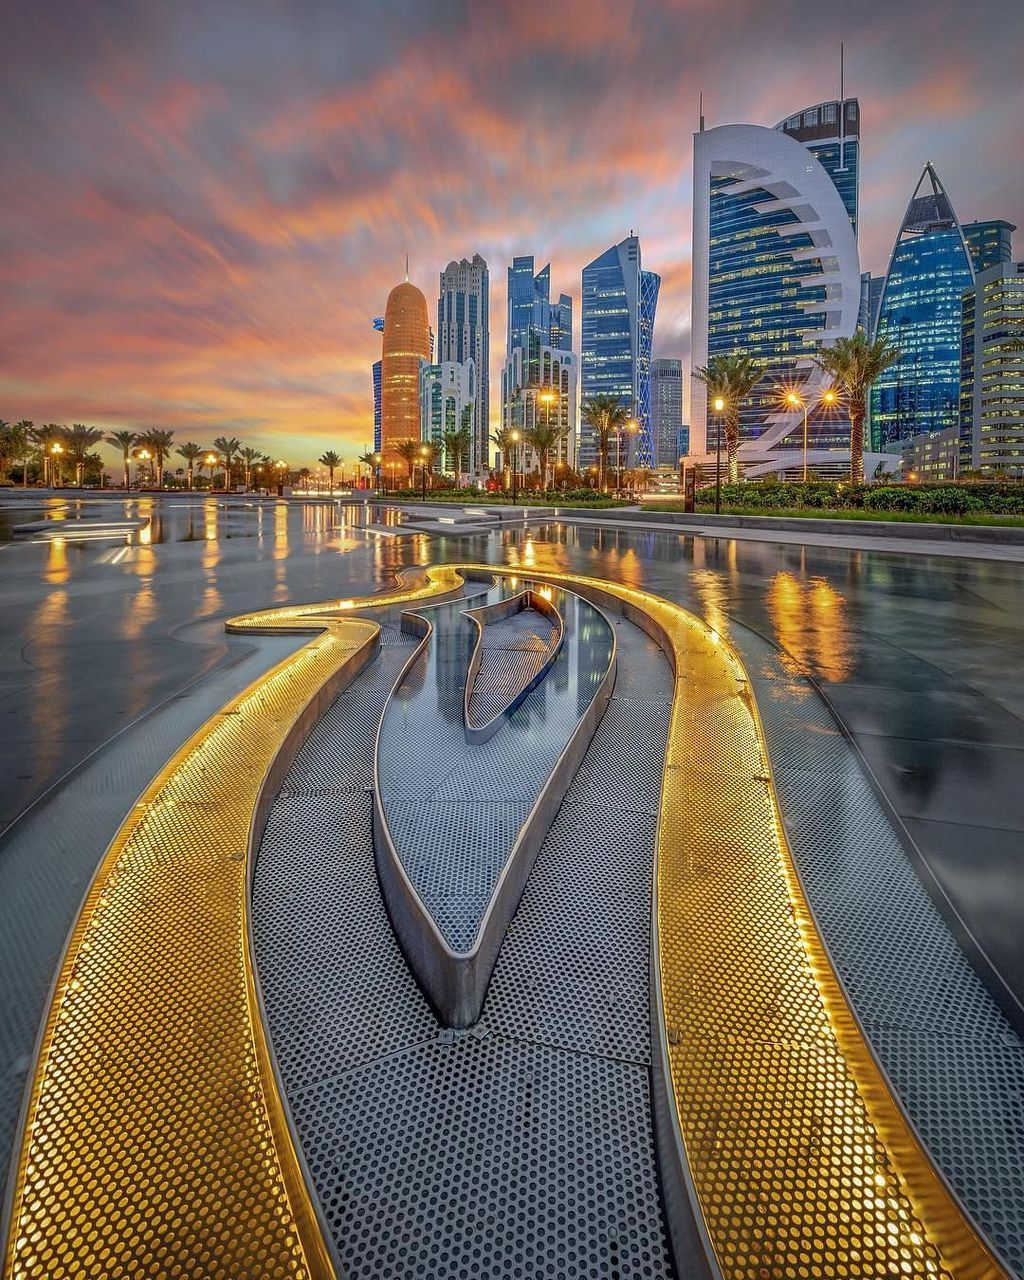 Awesome Photos Of Dubai To Make You Want To Visit It08